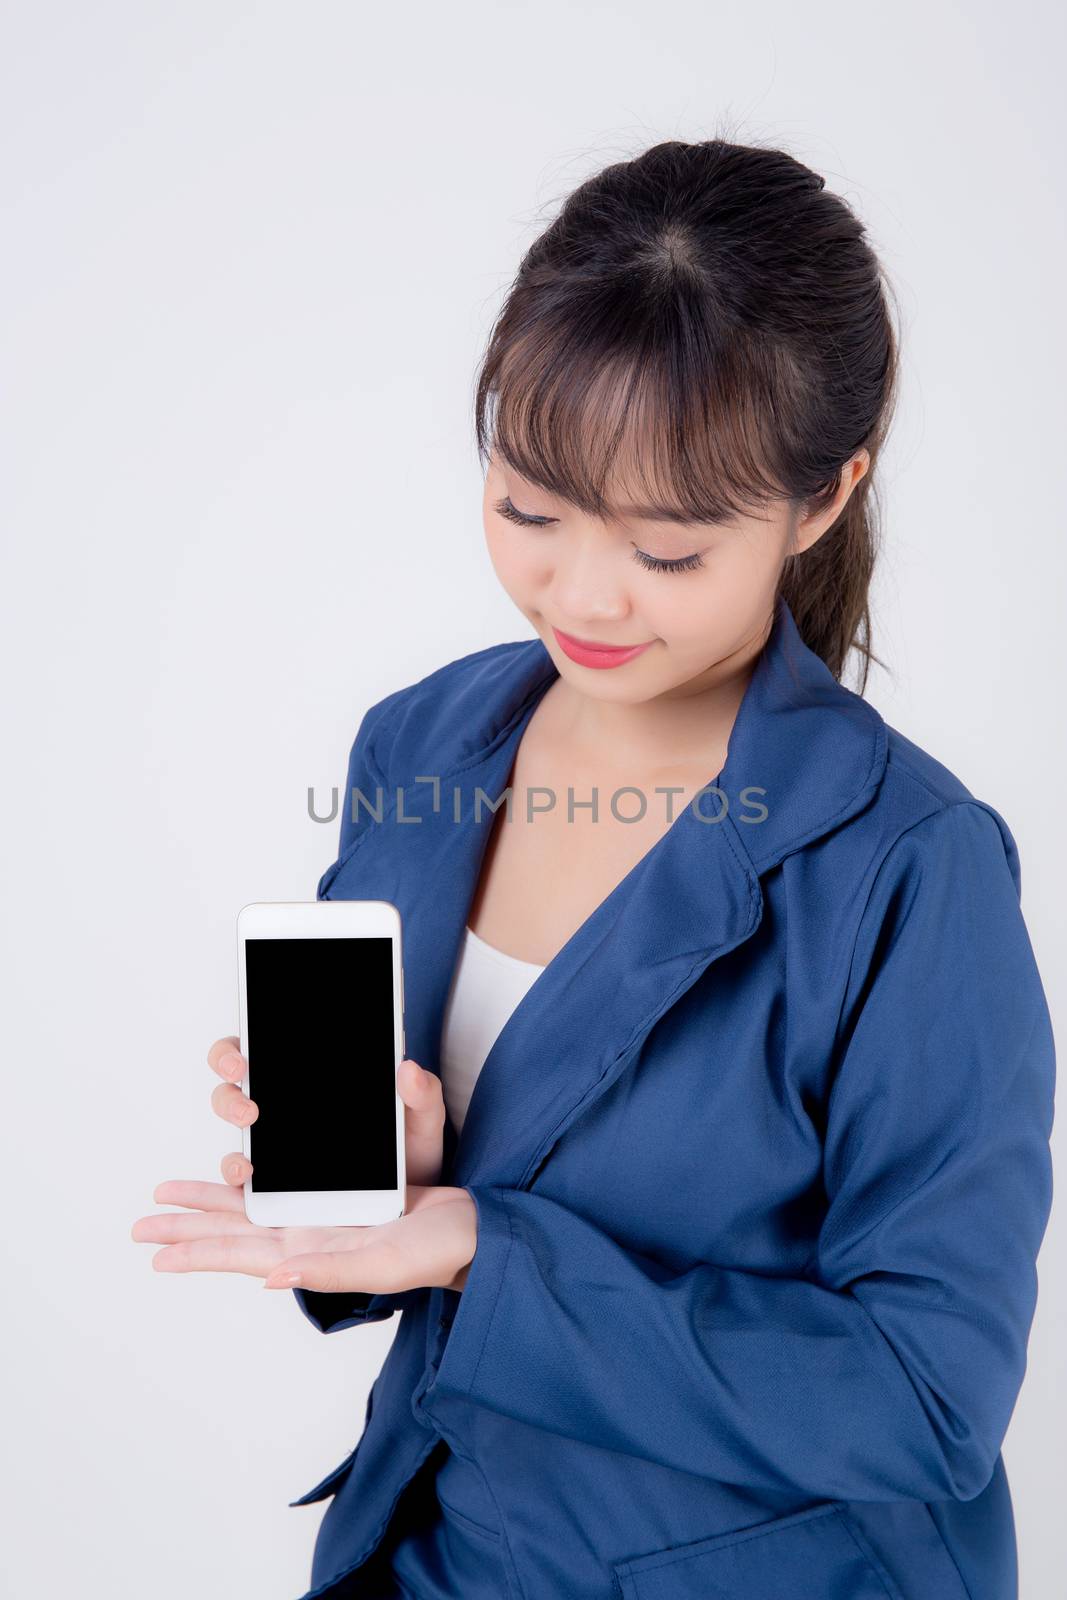 Beautiful portrait young business asian woman show blank smart mobile phone isolated on white background, businesswoman presenting smartphone for advertising, girl holding phone, communication concept.